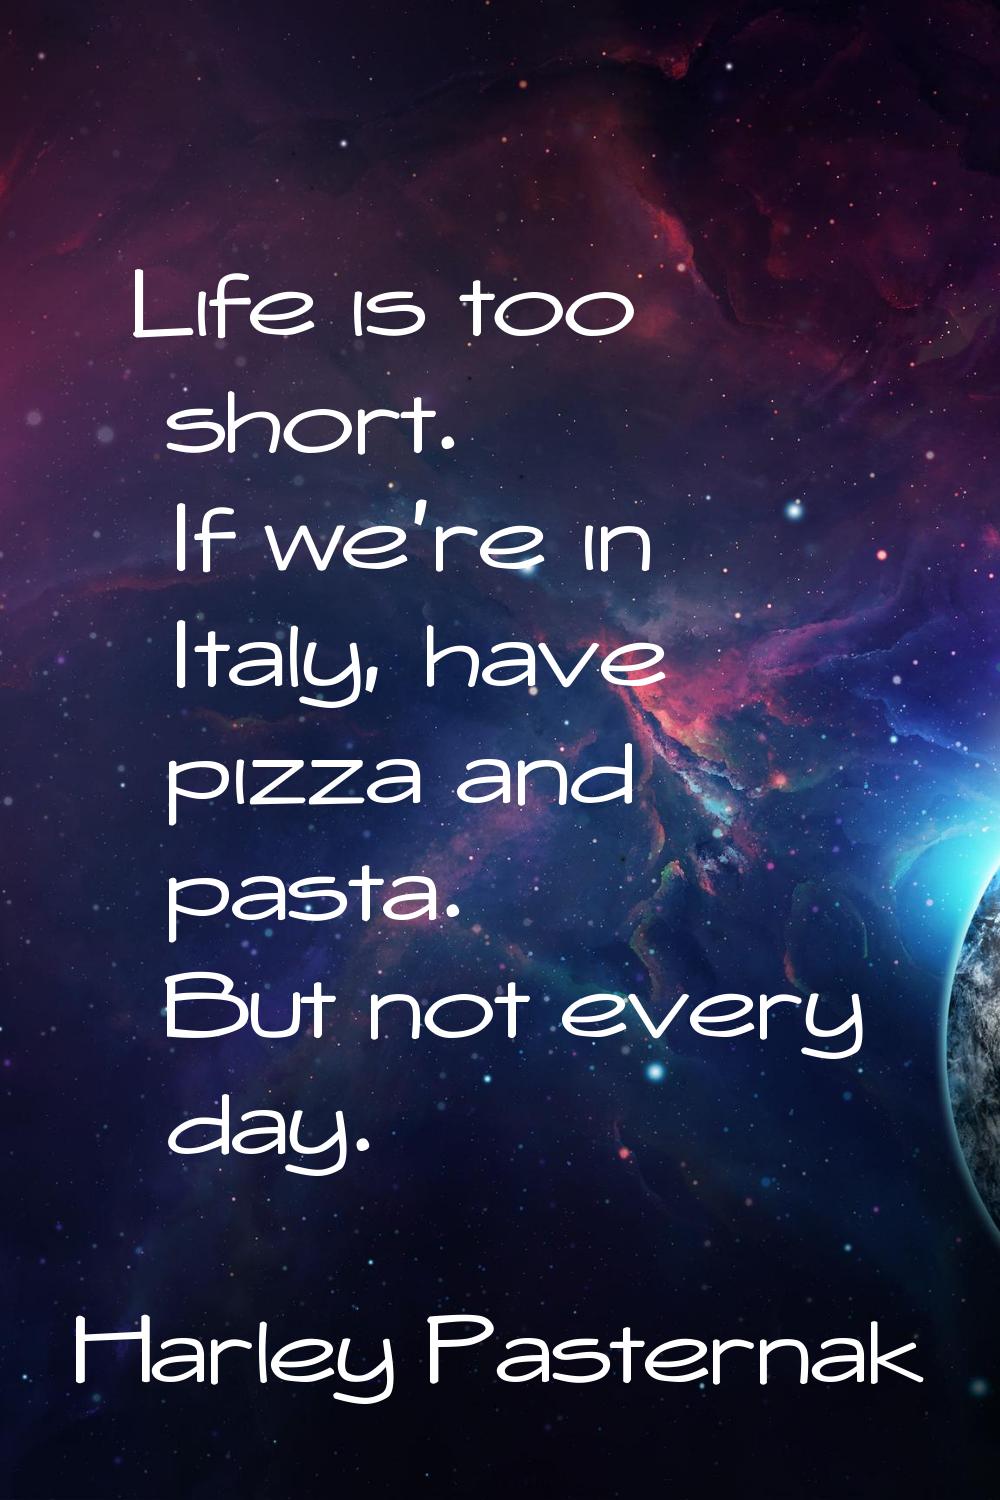 Life is too short. If we're in Italy, have pizza and pasta. But not every day.